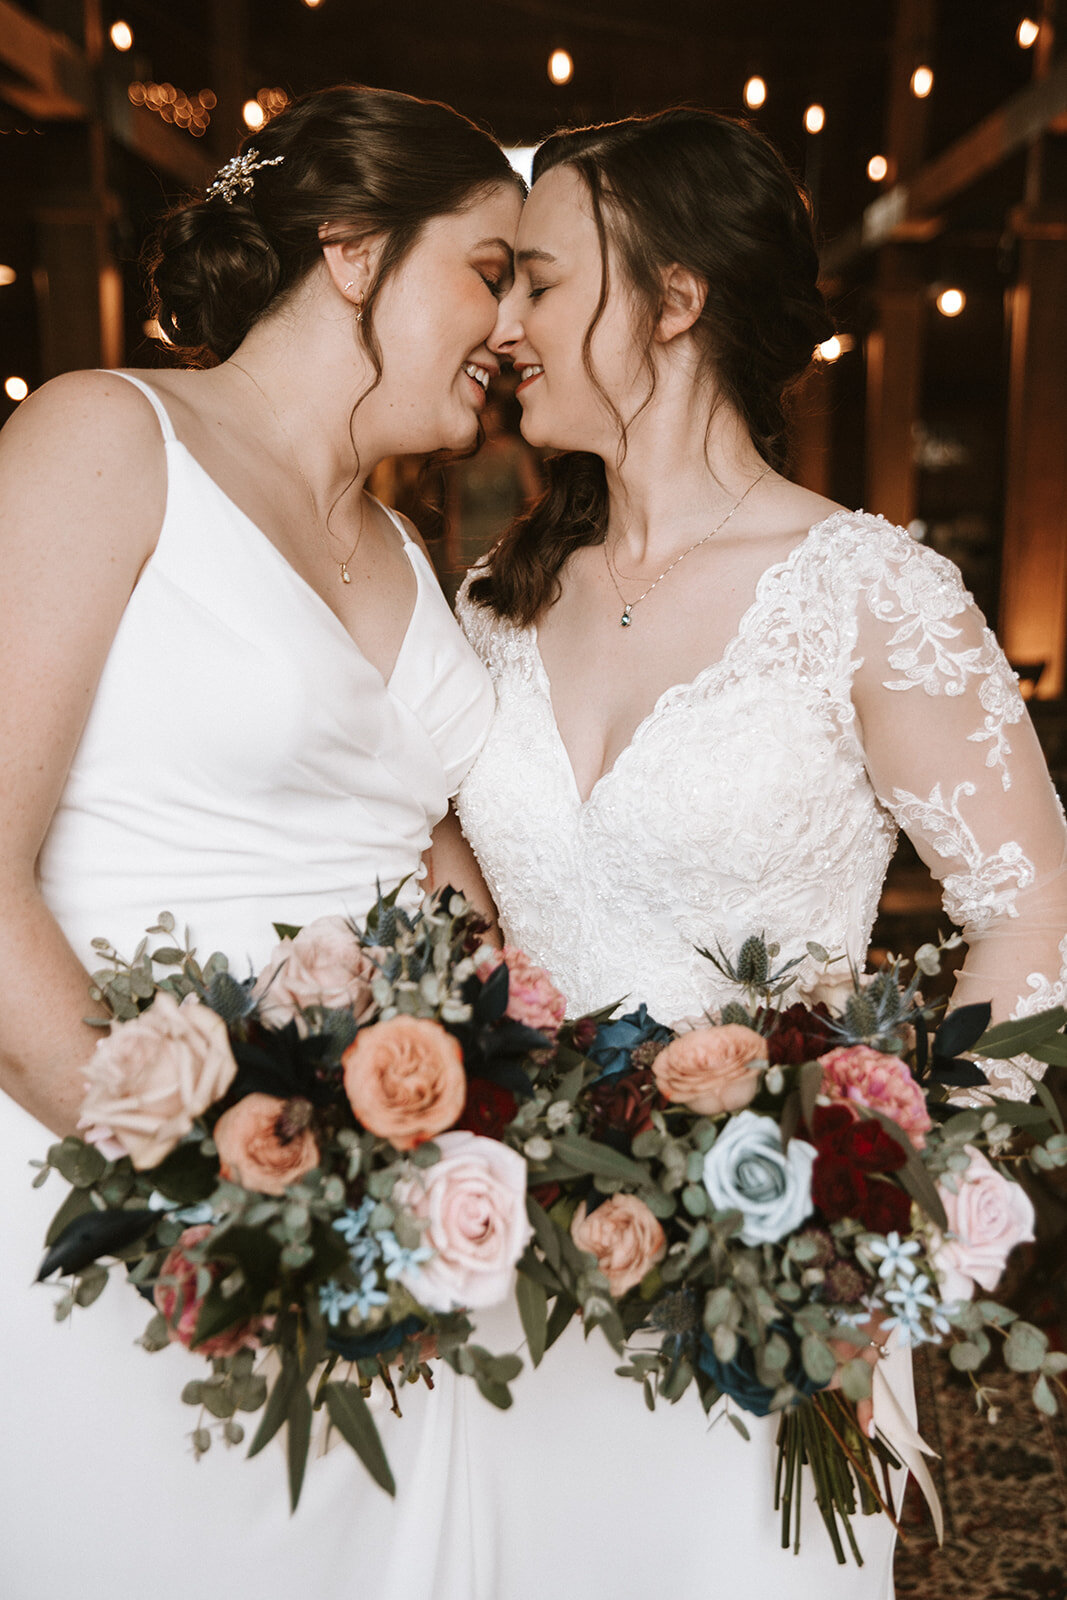 Two brides with faces touching